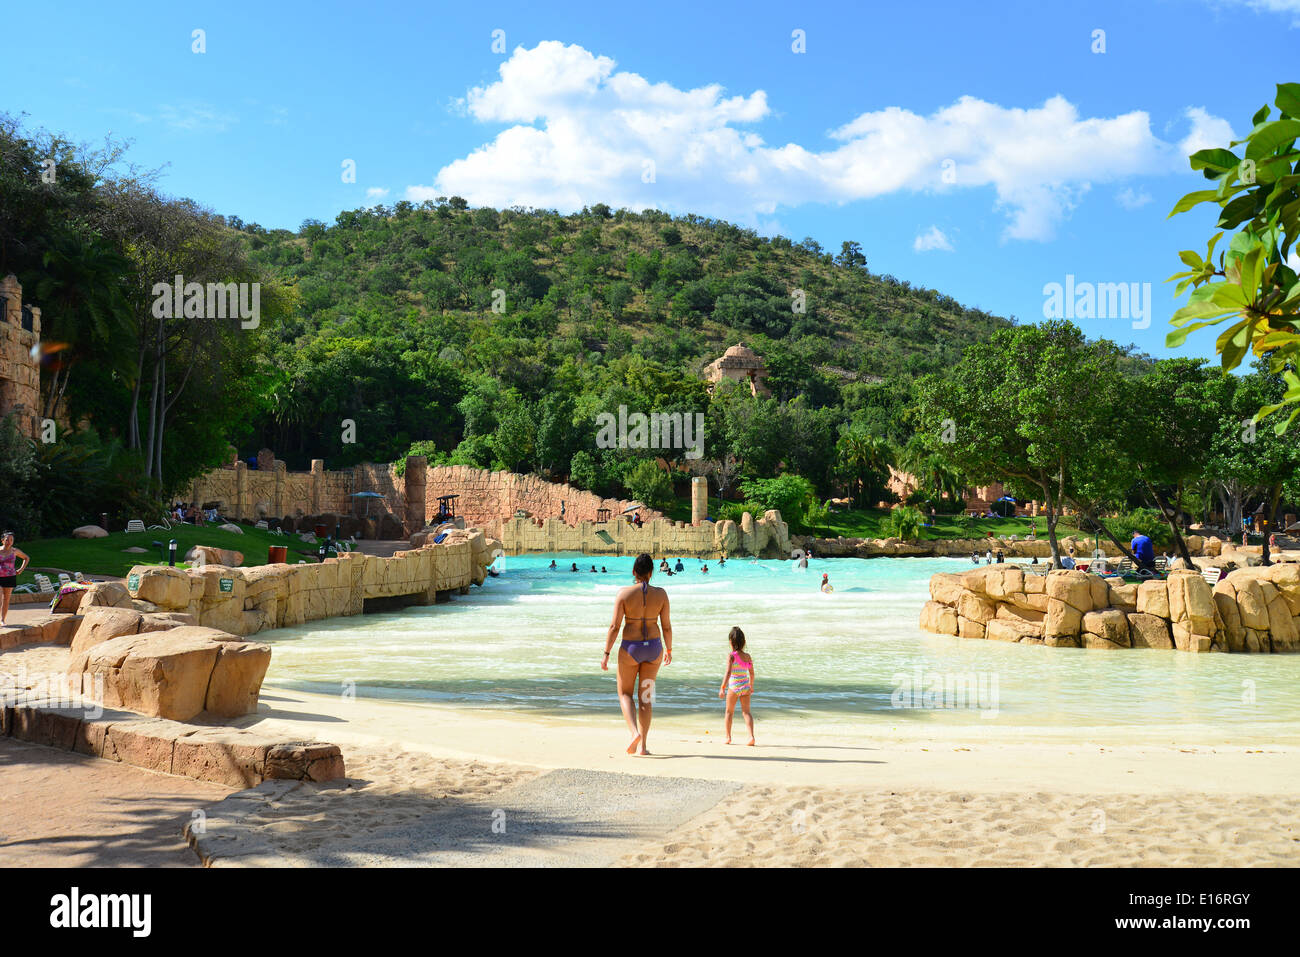 Roaring Lagoon Wave Pool, Valley of Waves, Sun City Resort, Pilanesberg, North West Province, Republic of South Africa Stock Photo